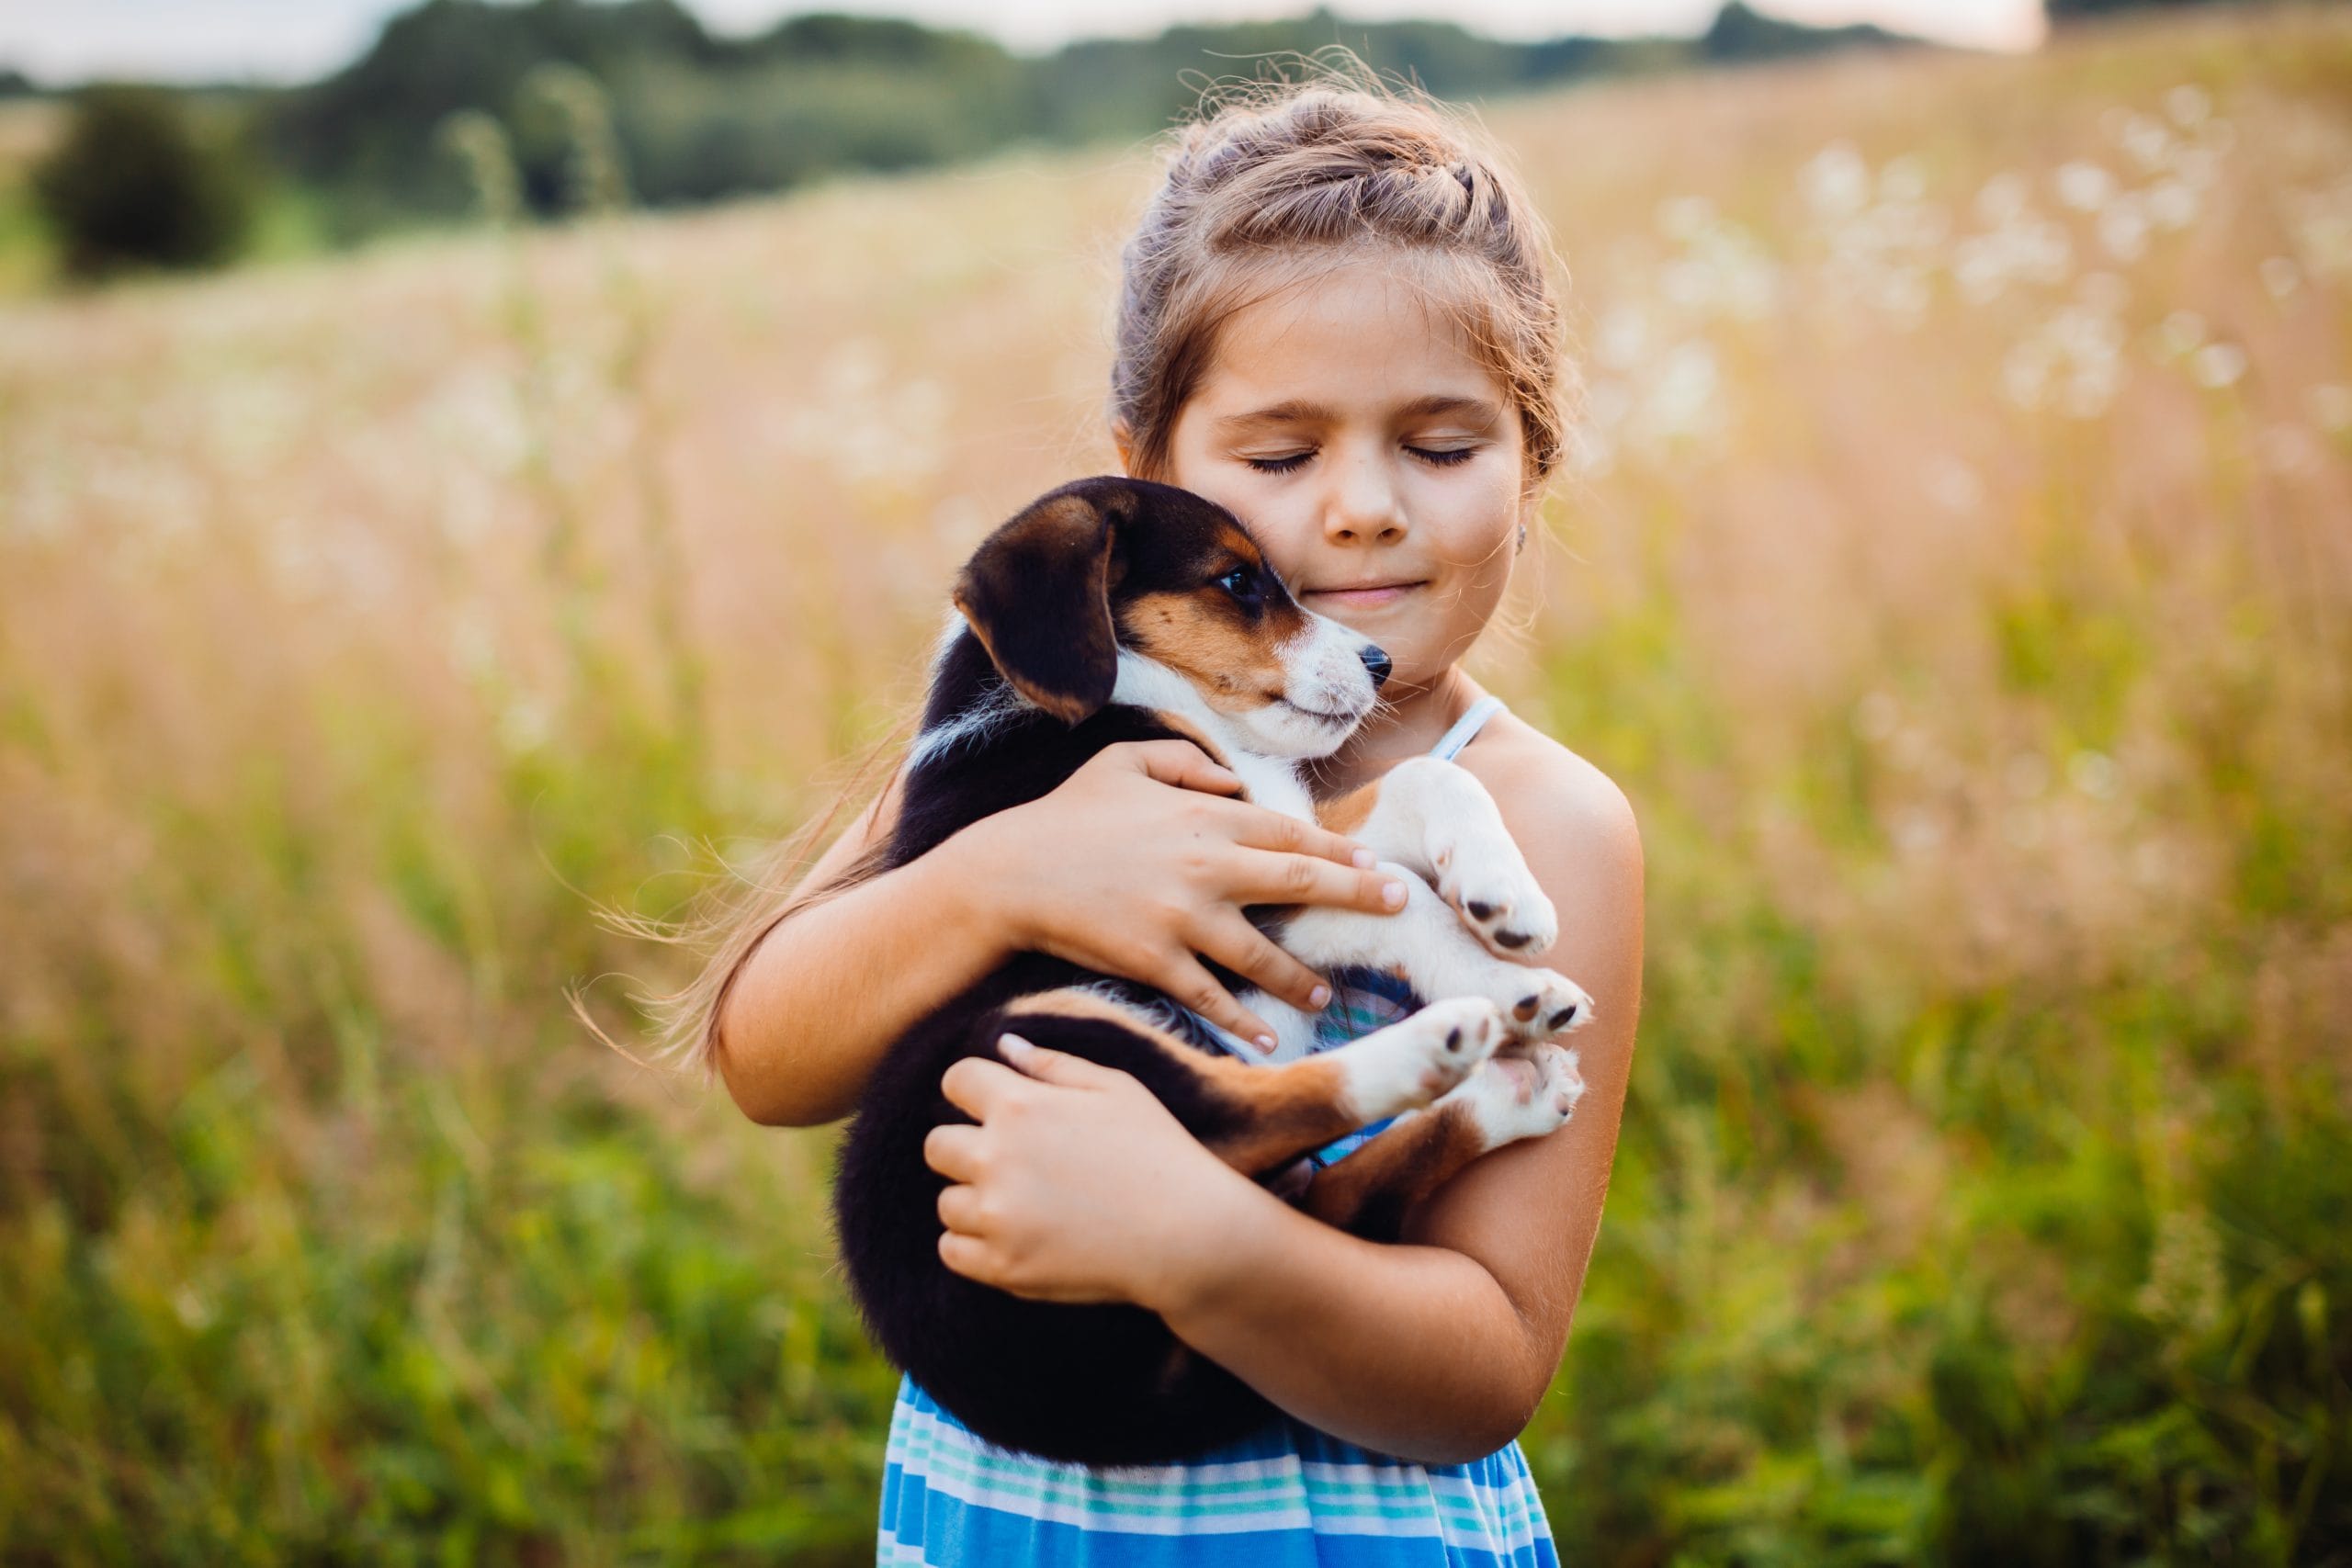 Little girl holds a puppy on her arms